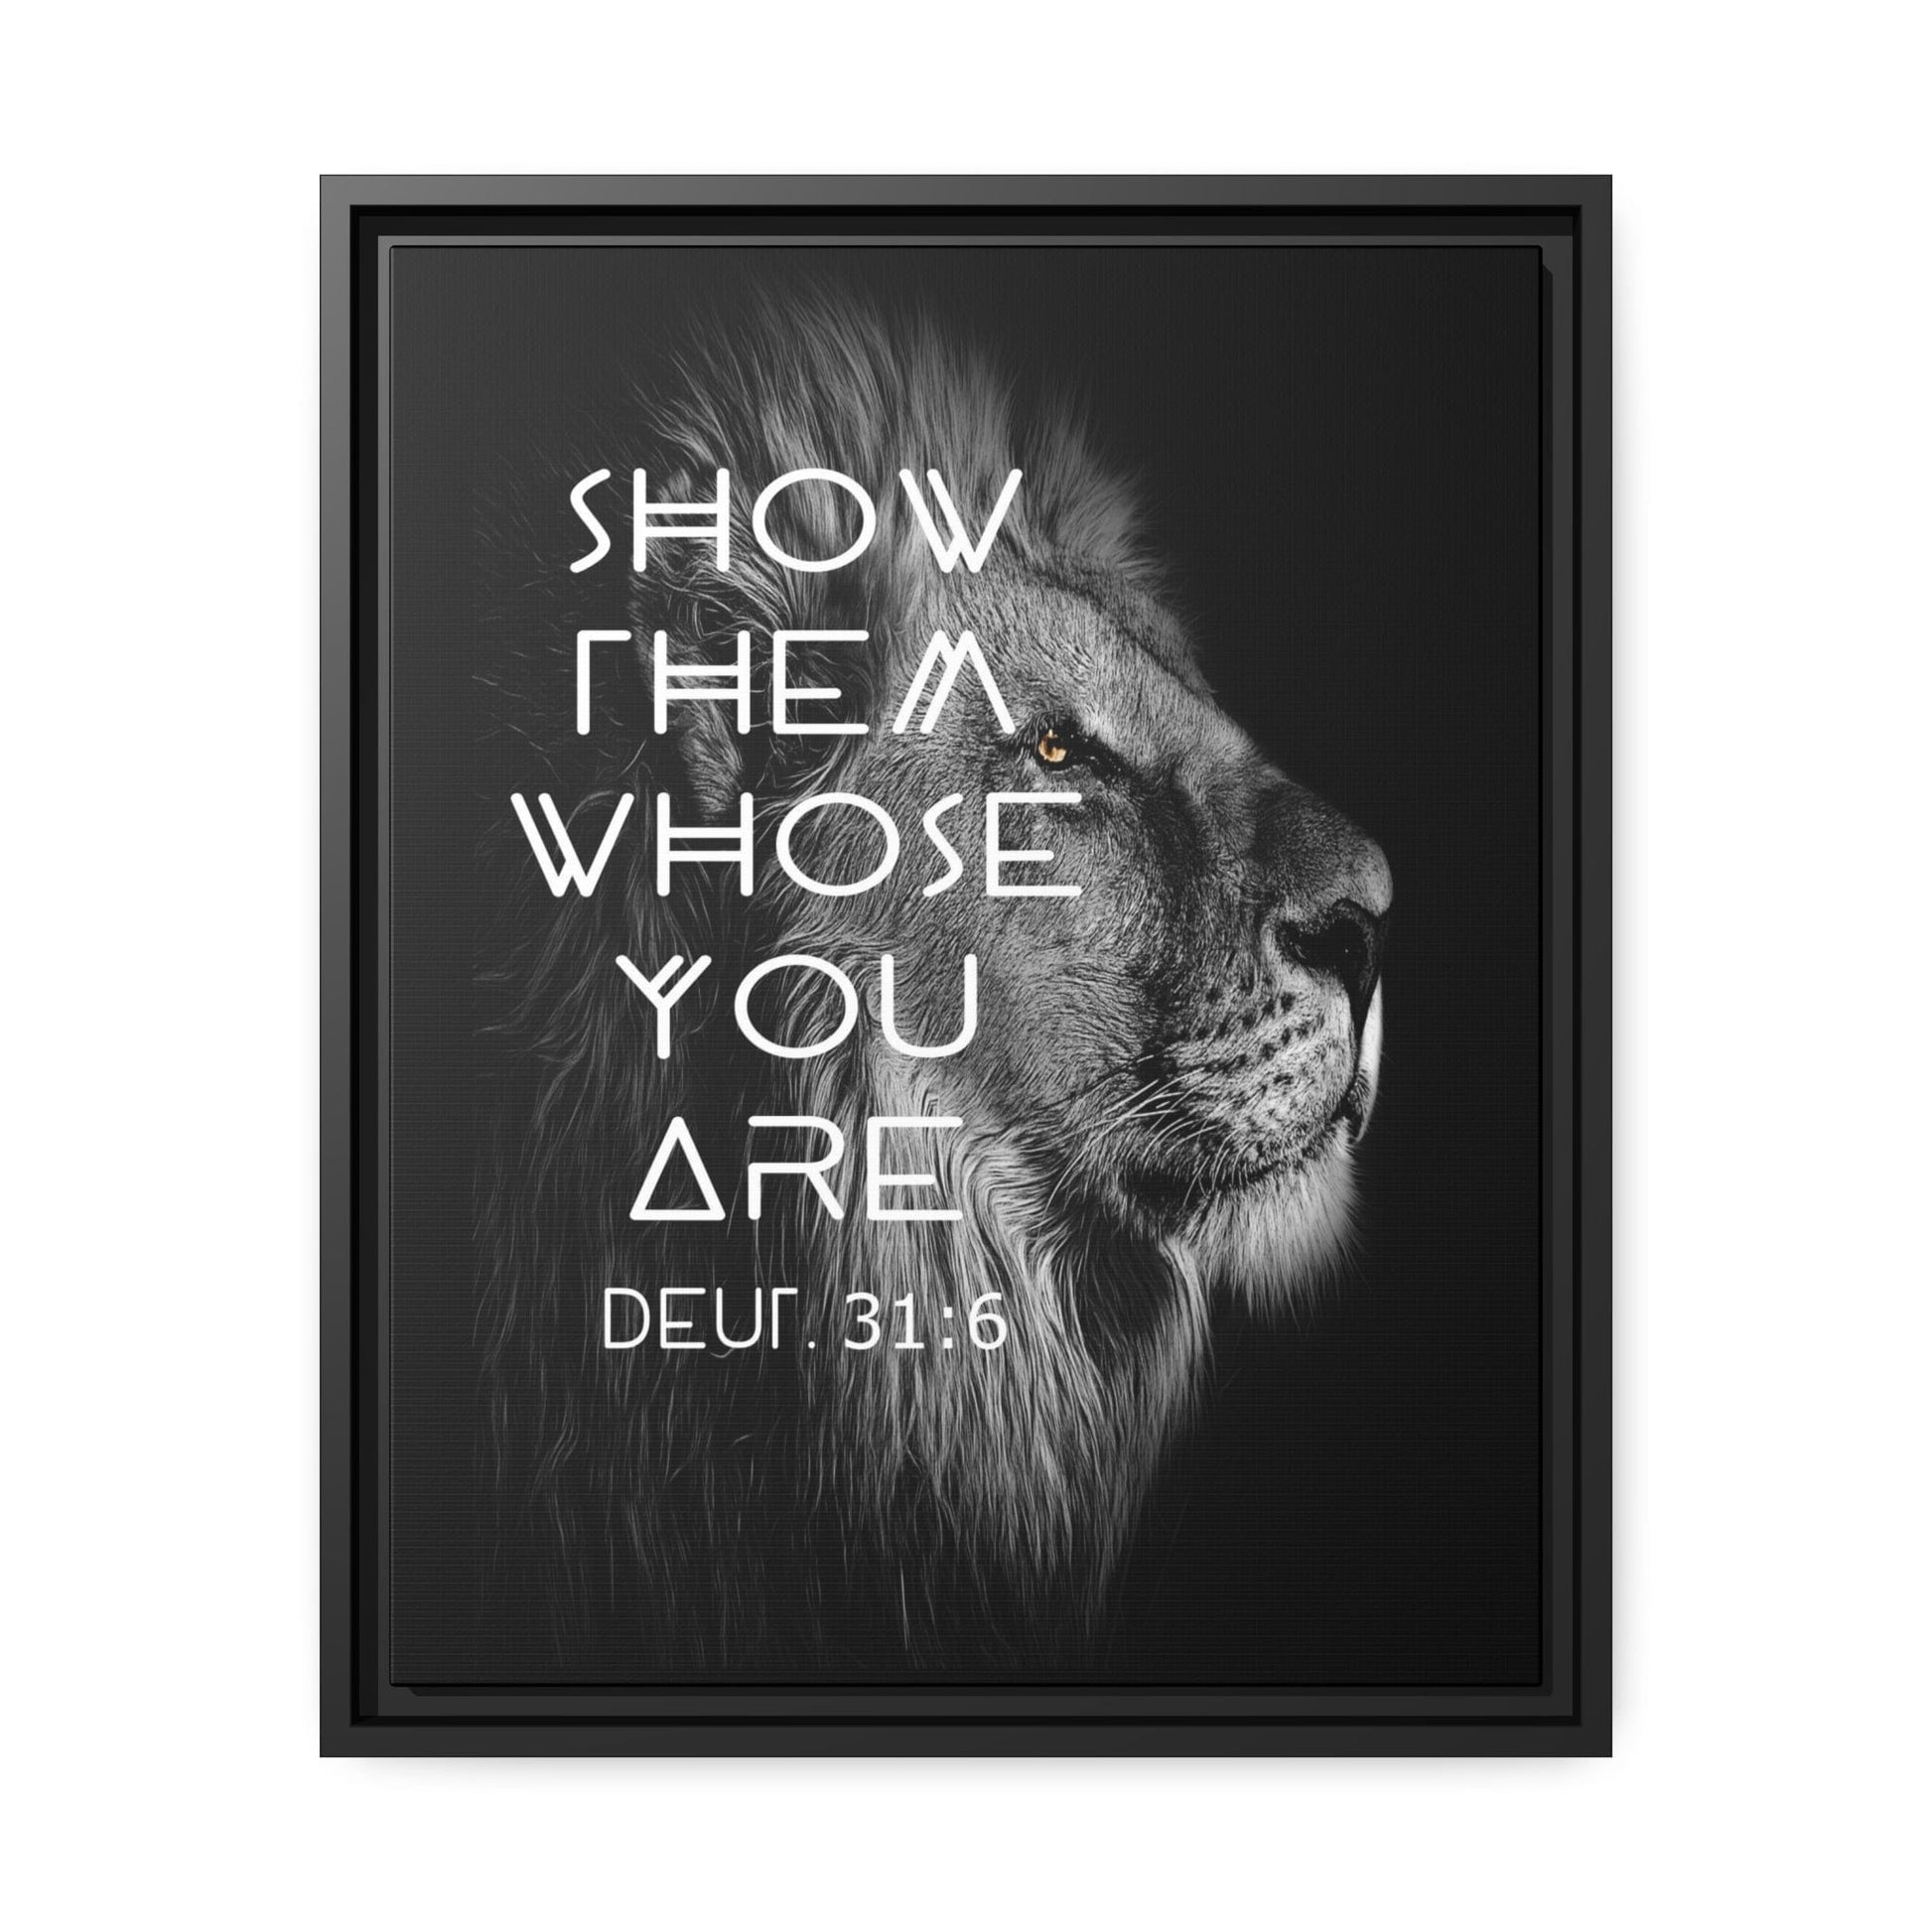 Printify Canvas 16″ x 20″ (Vertical) / Black / 1.25" Show Them Whose You Are - Deuteronomy 31:6 Christian Canvas Wall Art